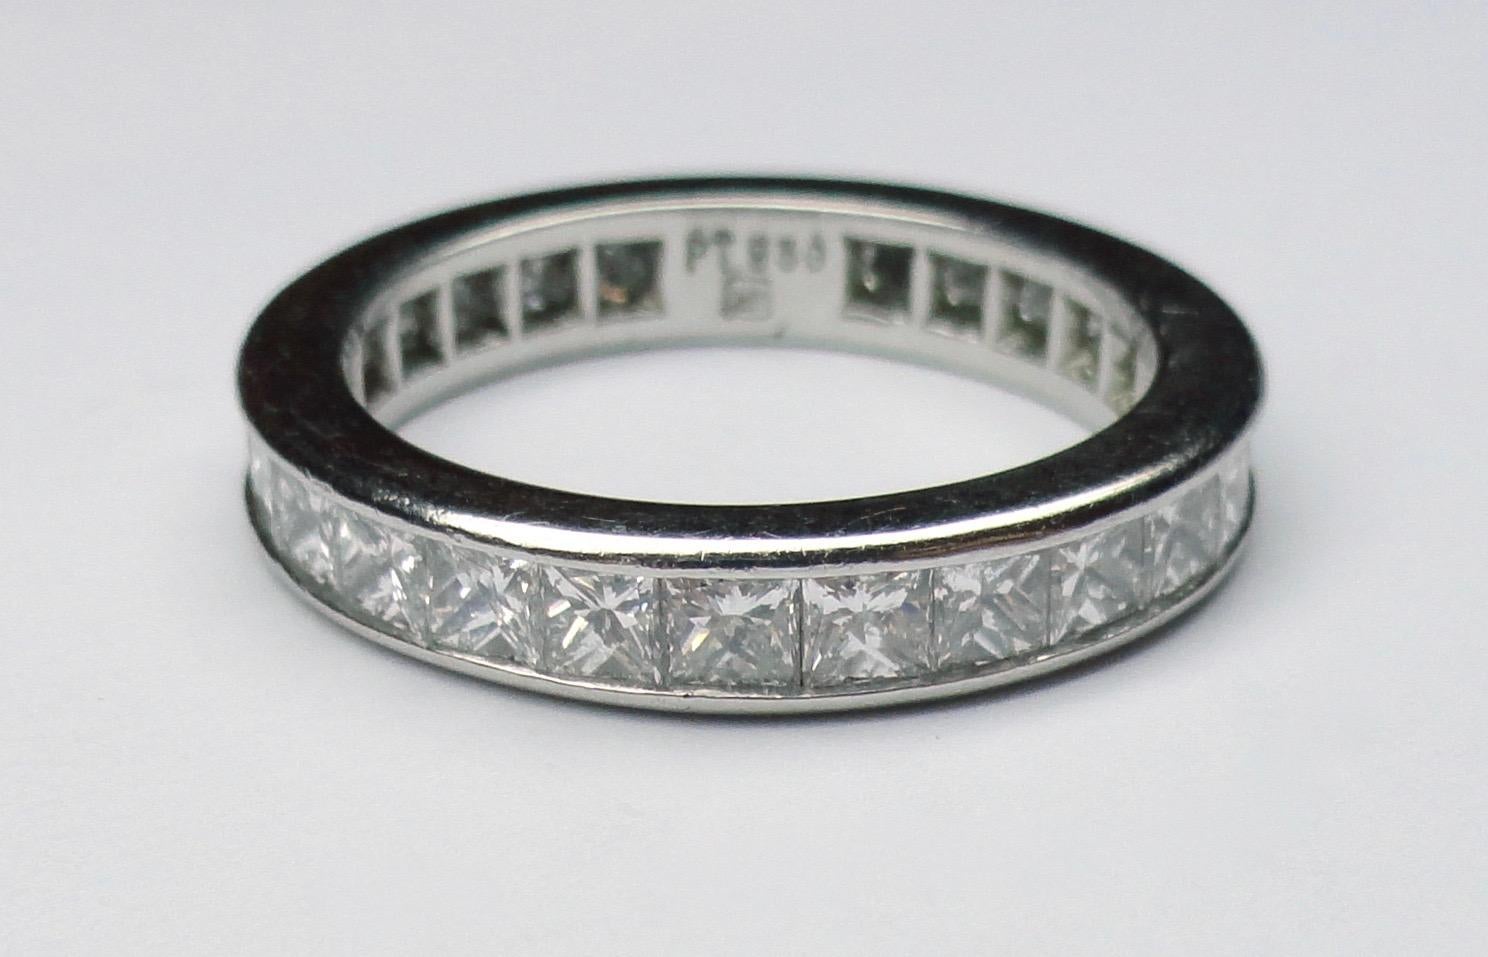 Eternity ring with princess cut diamonds with a total diamond weight of 2 carats c.a., mounted in platinum.